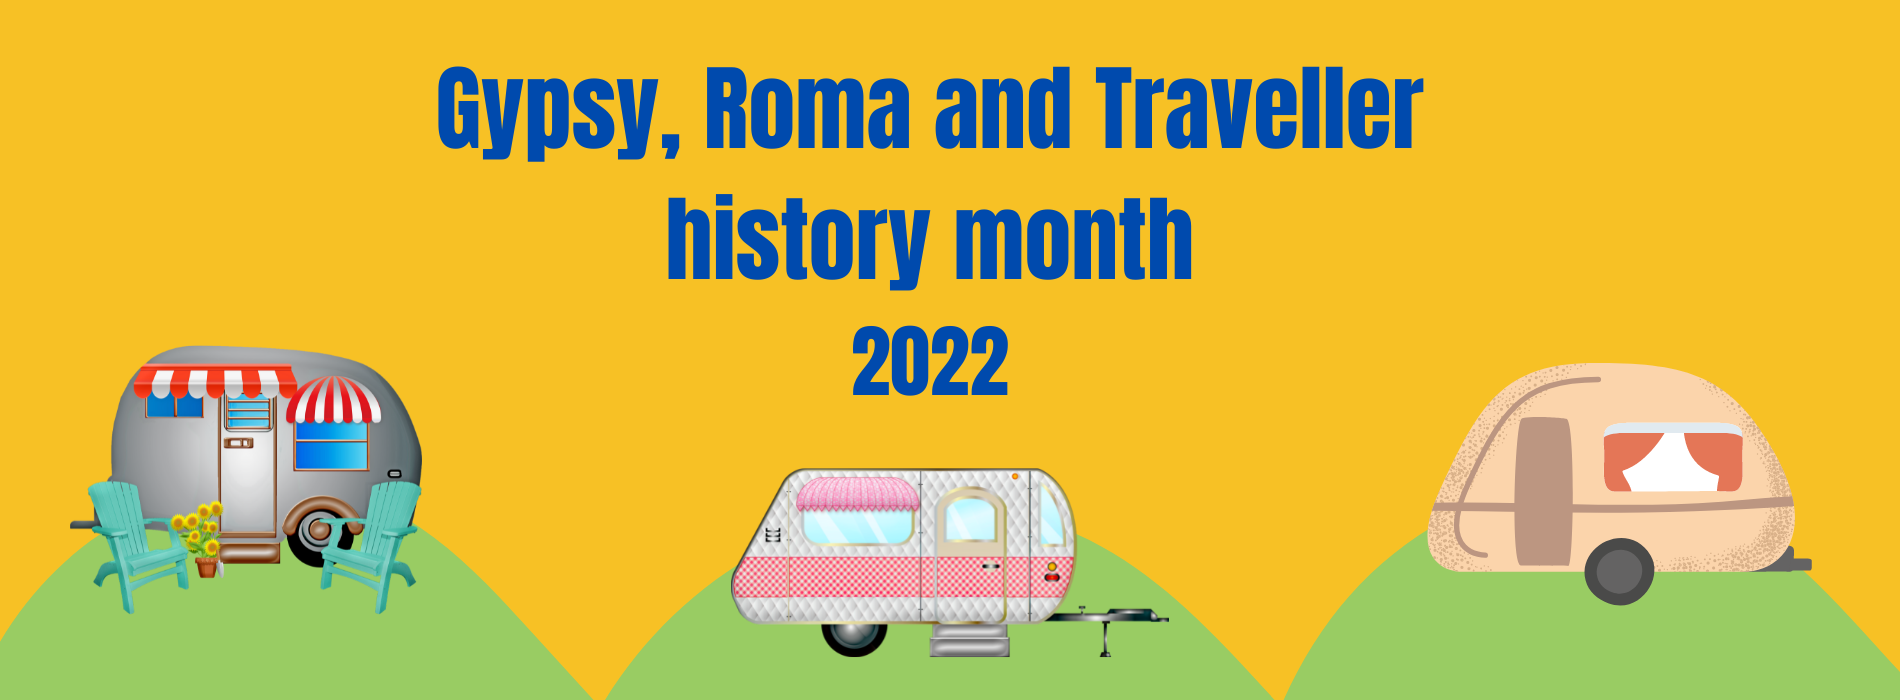 Gypsy, Roma and Traveller history month 2022